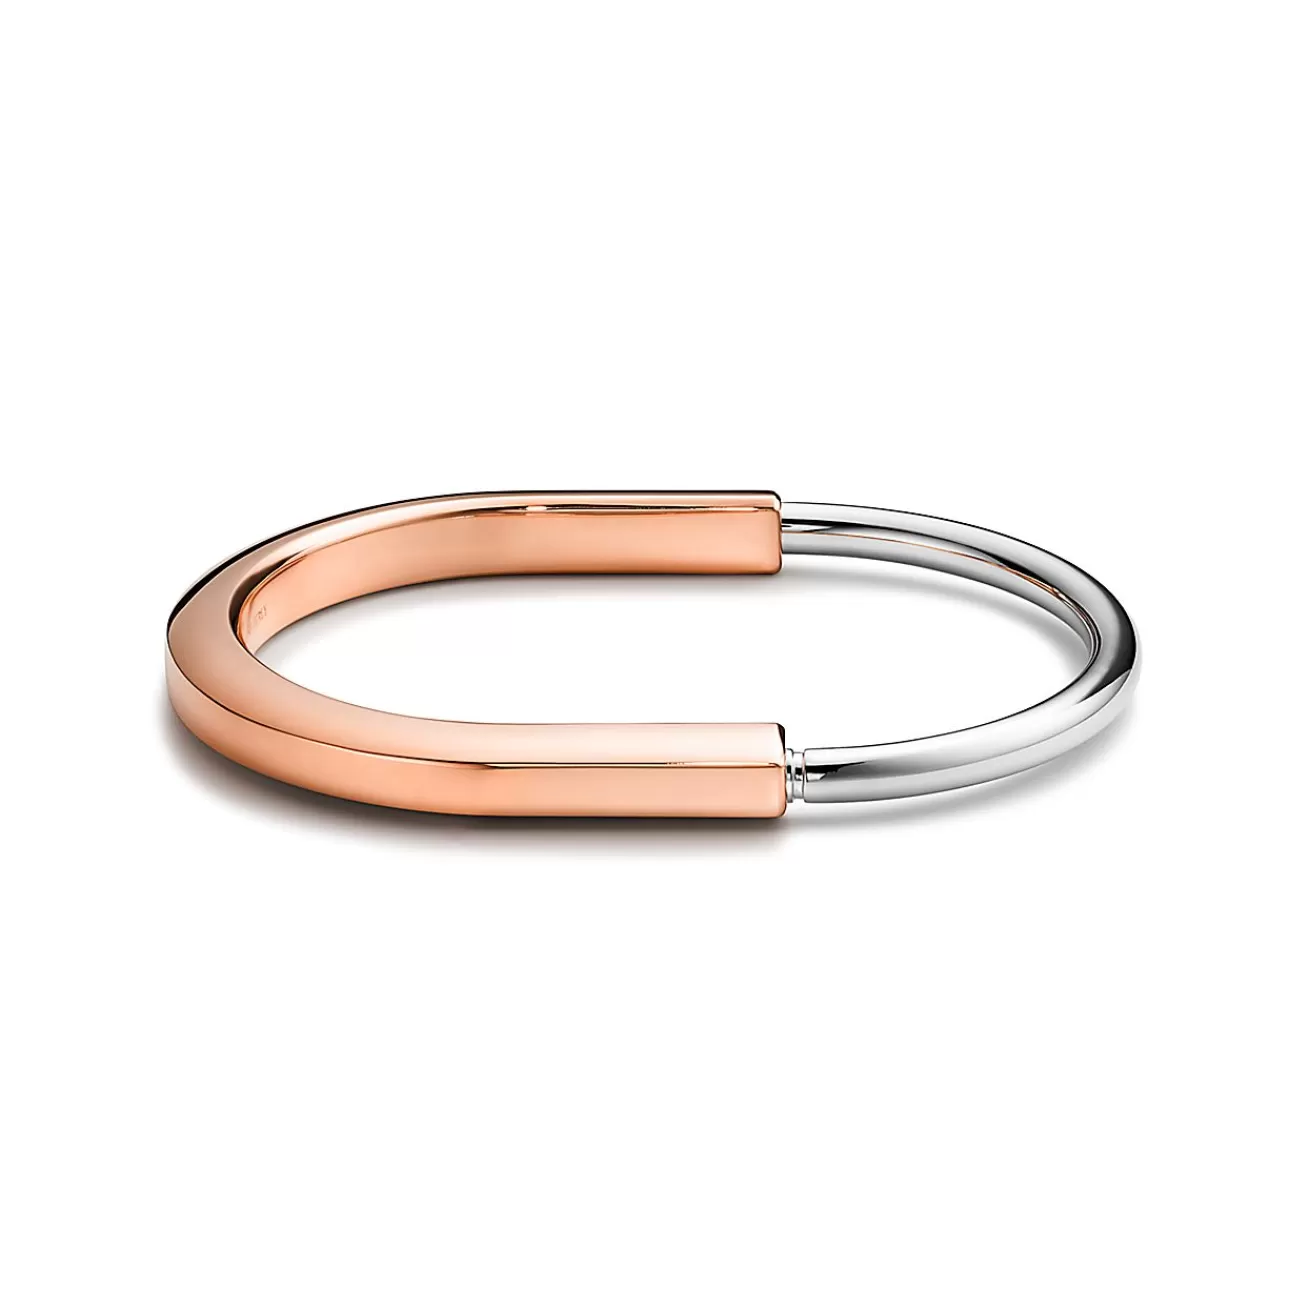 Tiffany & Co. Tiffany Lock Bangle in Rose and White Gold | ^ Bracelets | Gifts for Her